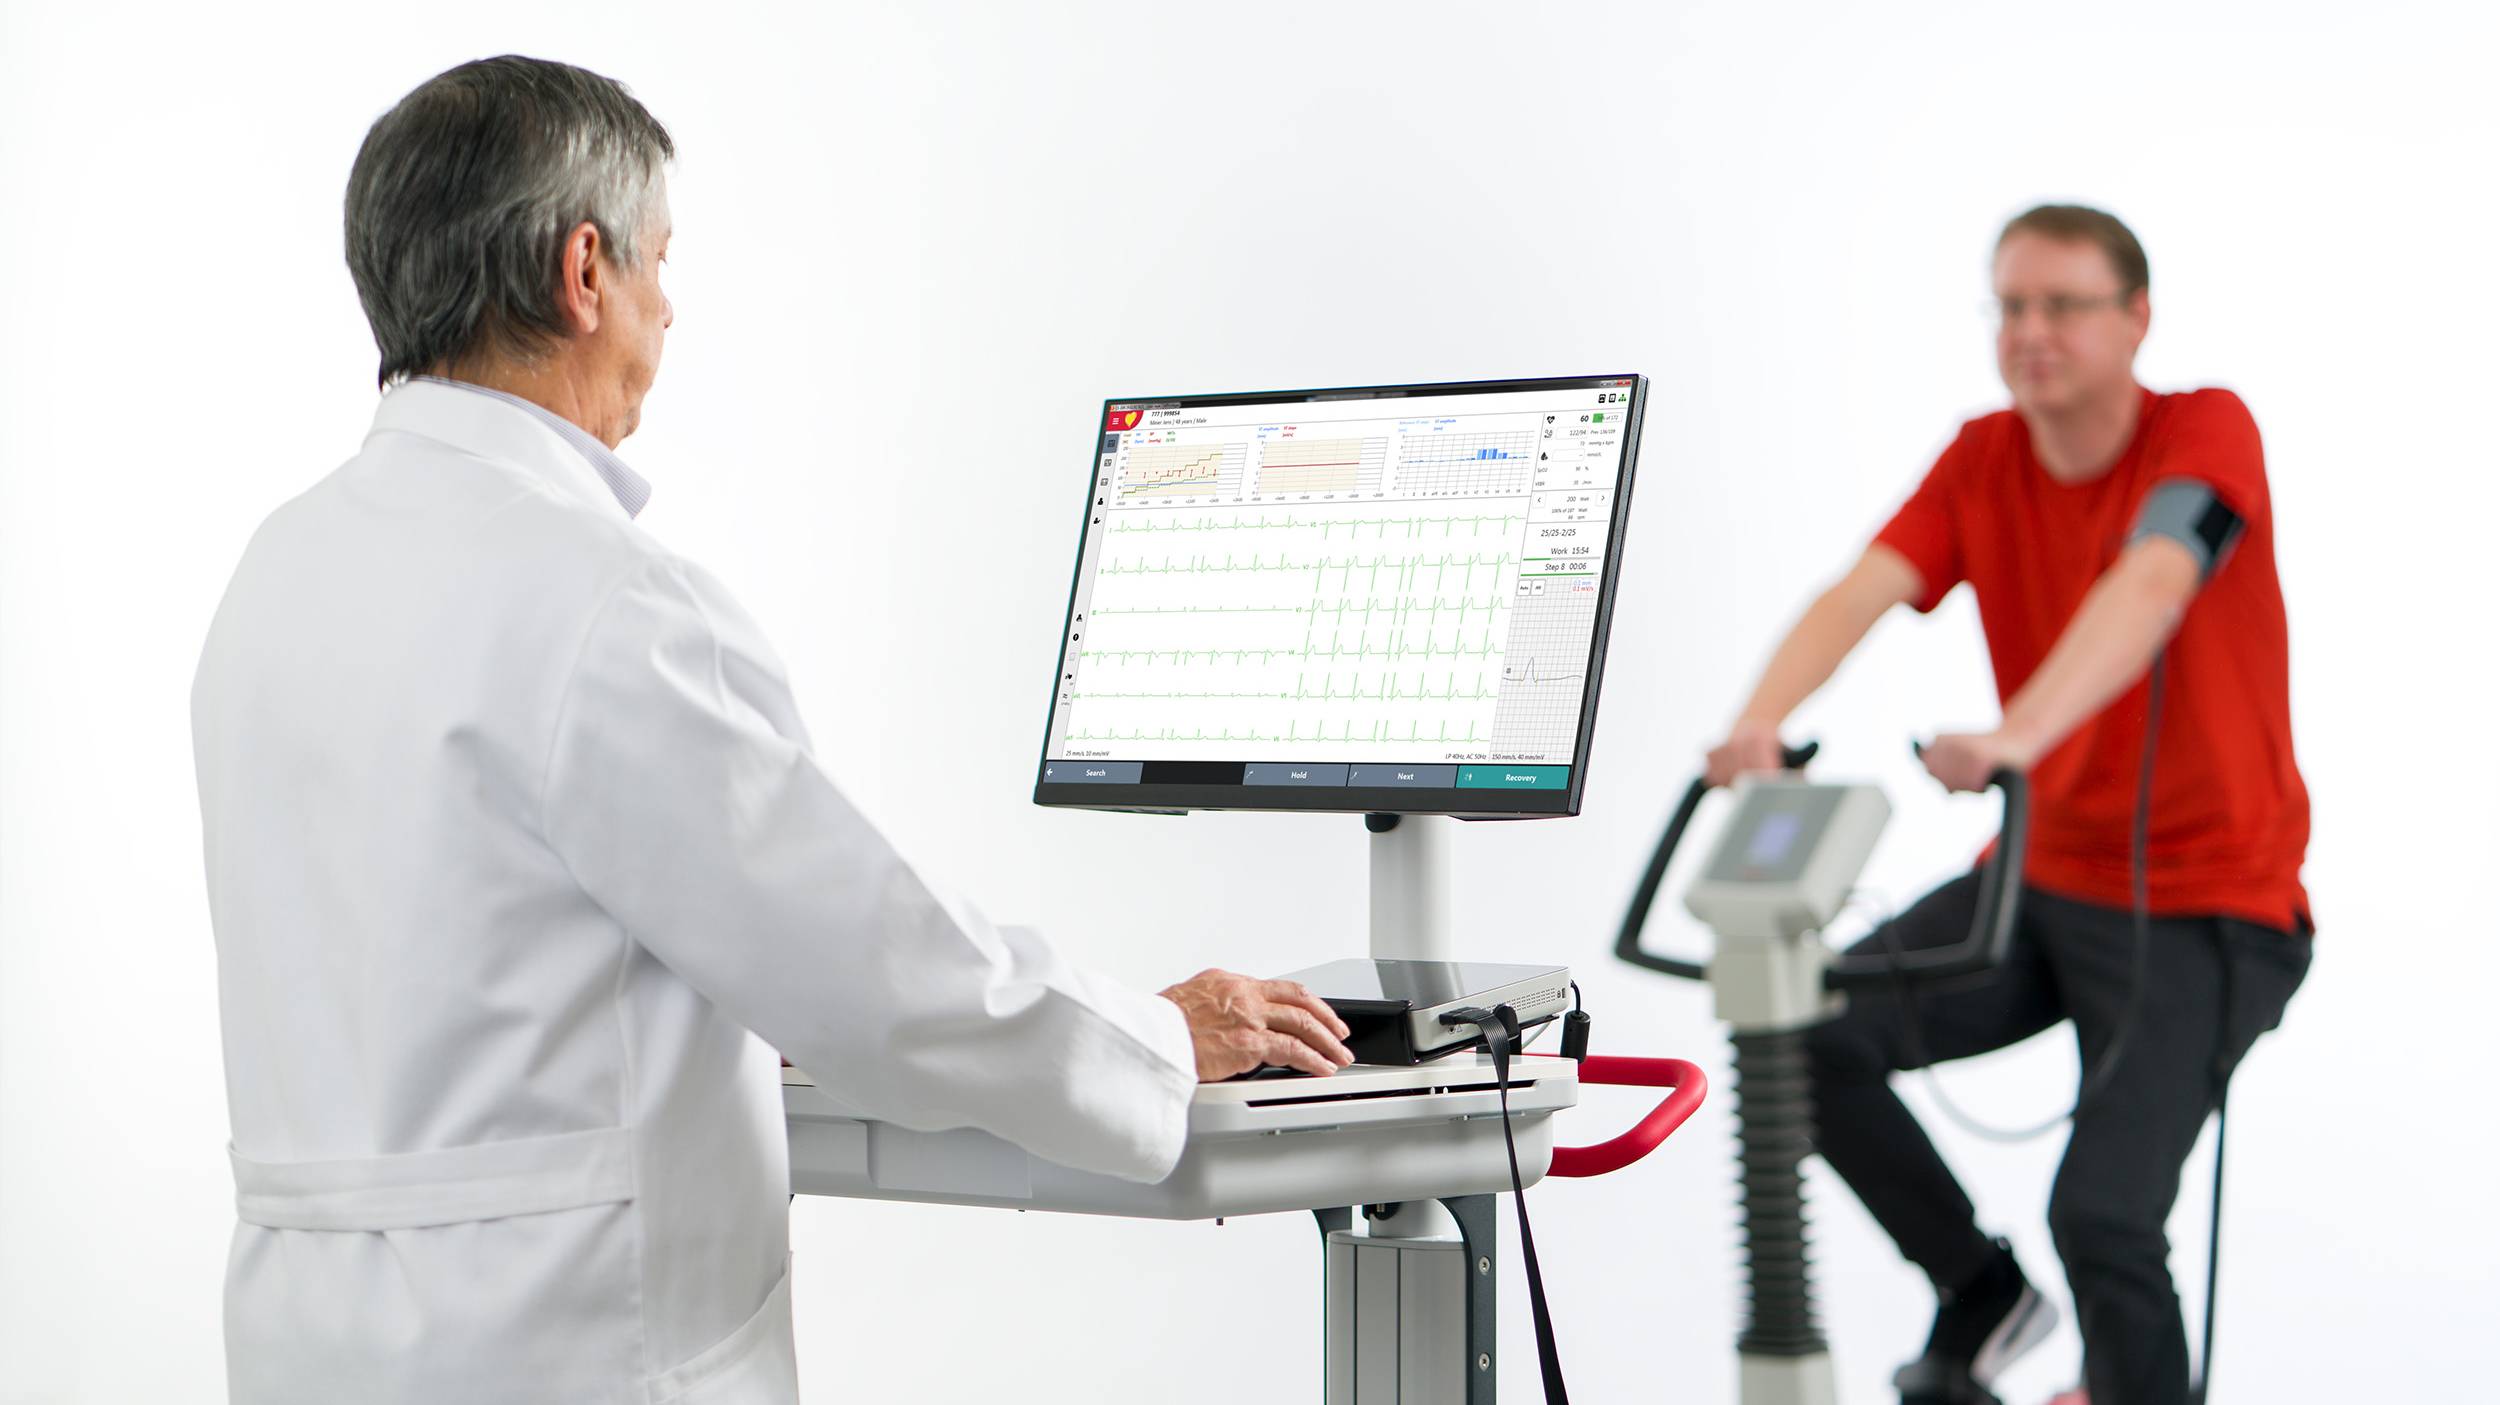 Exercise ECG in an integrated system | © SCHILLER